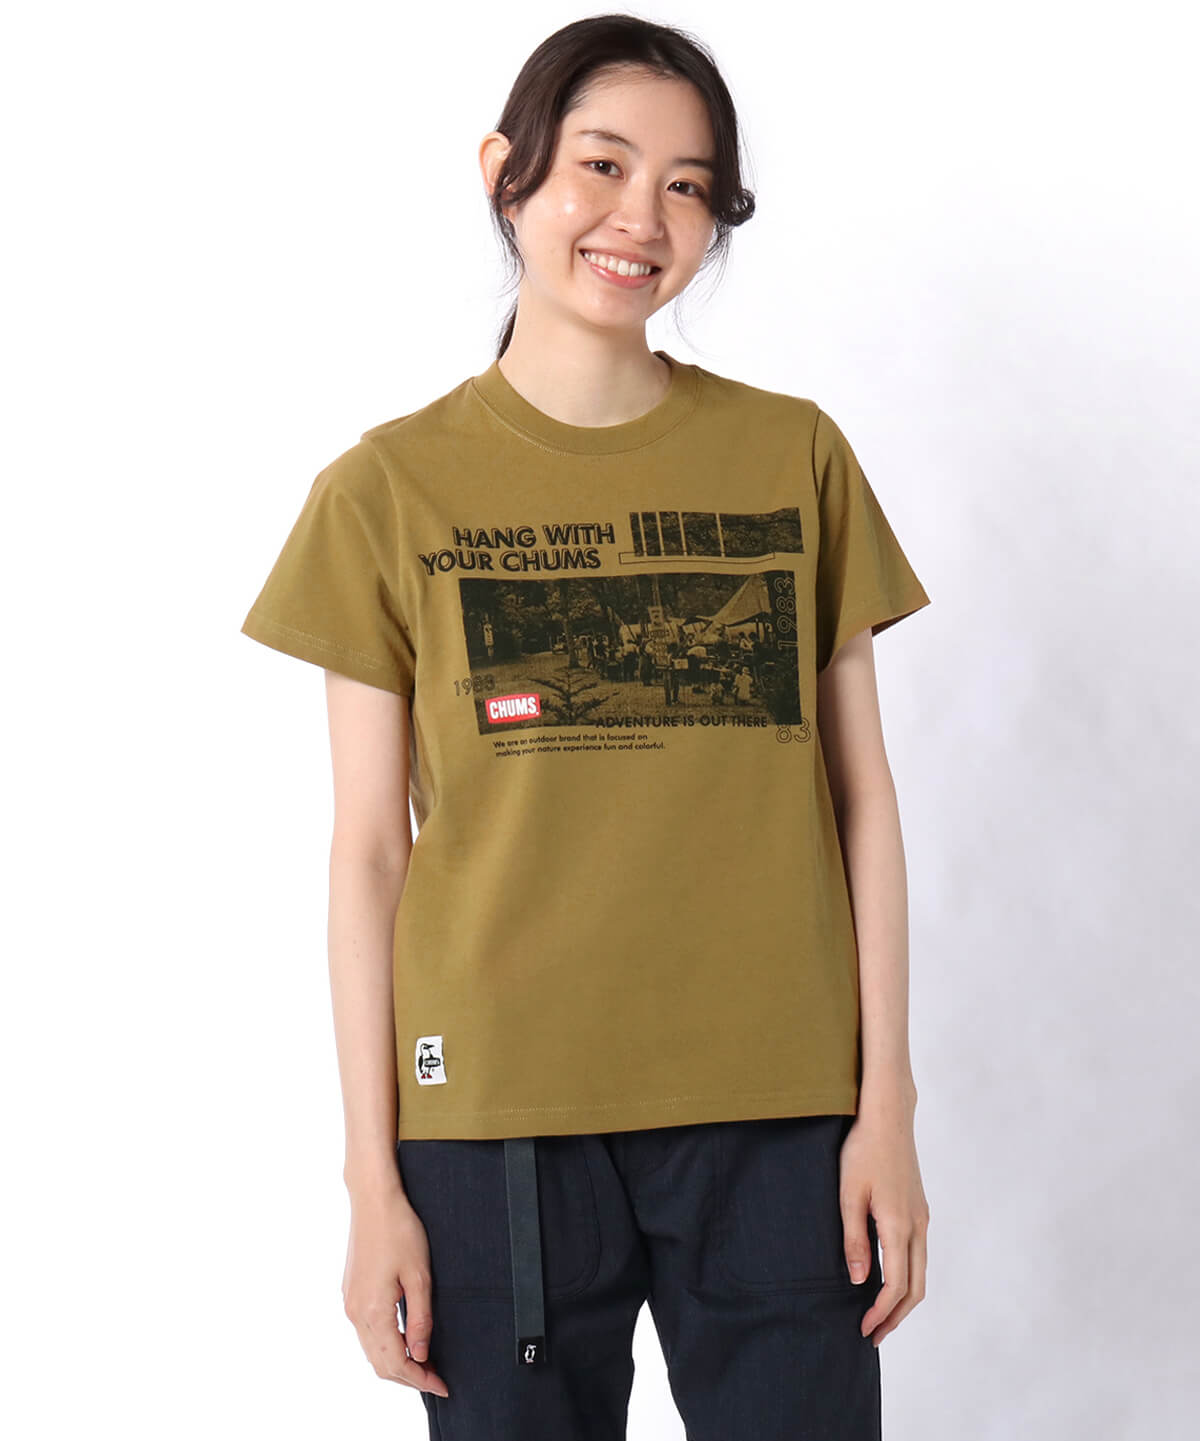 Adventure is Out There T-Shirt(アドベンチャーイズアウトゼアTシャツ(トップス/Tシャツ))